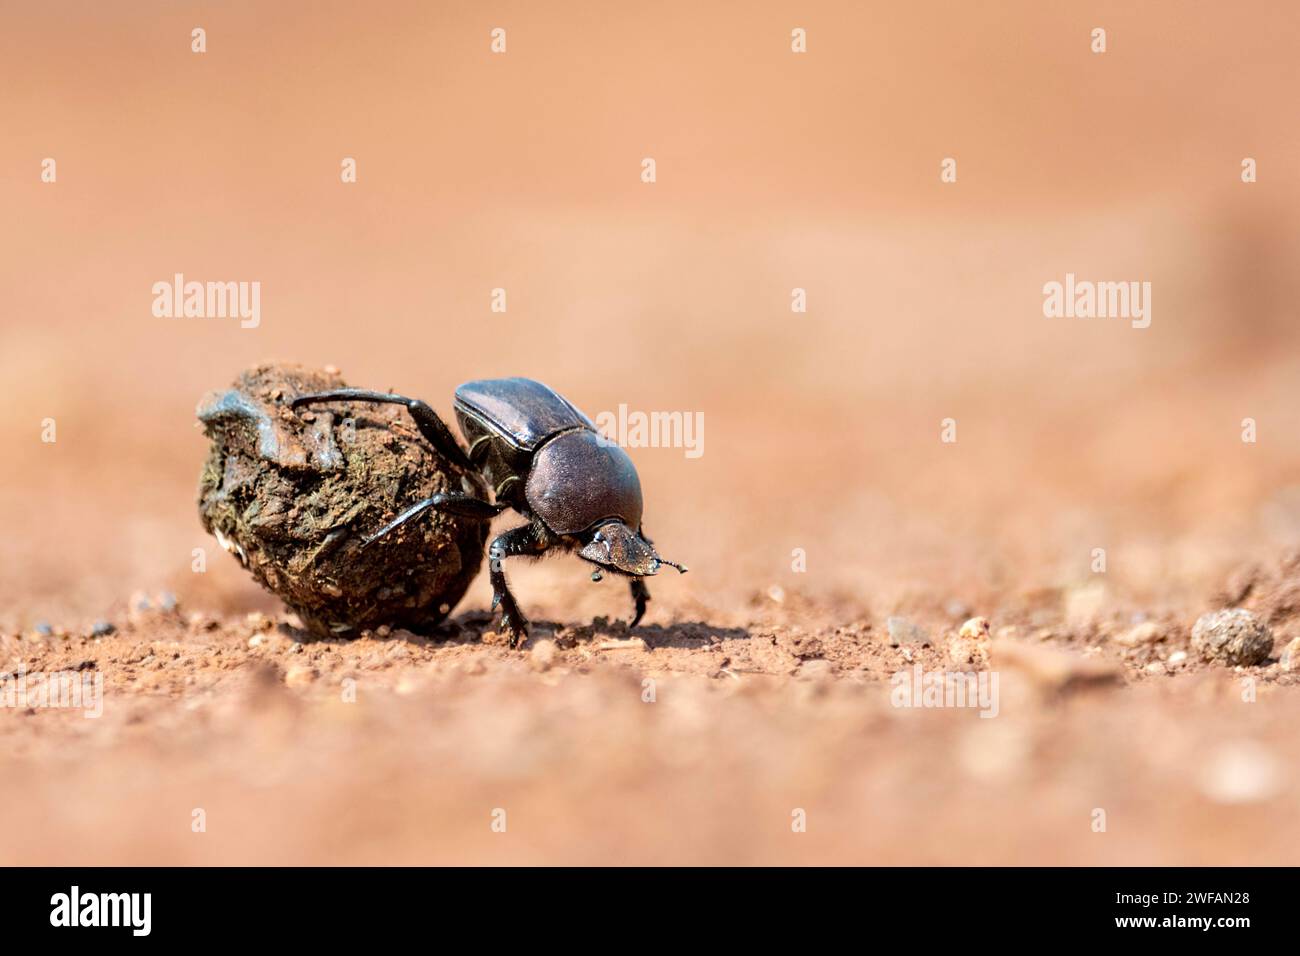 Dung beetle rolling dung in Zimanga Private Reserve, South Africa. Possibly Large Copper Dung Beetle (Kheper nigroaeneus) Stock Photo